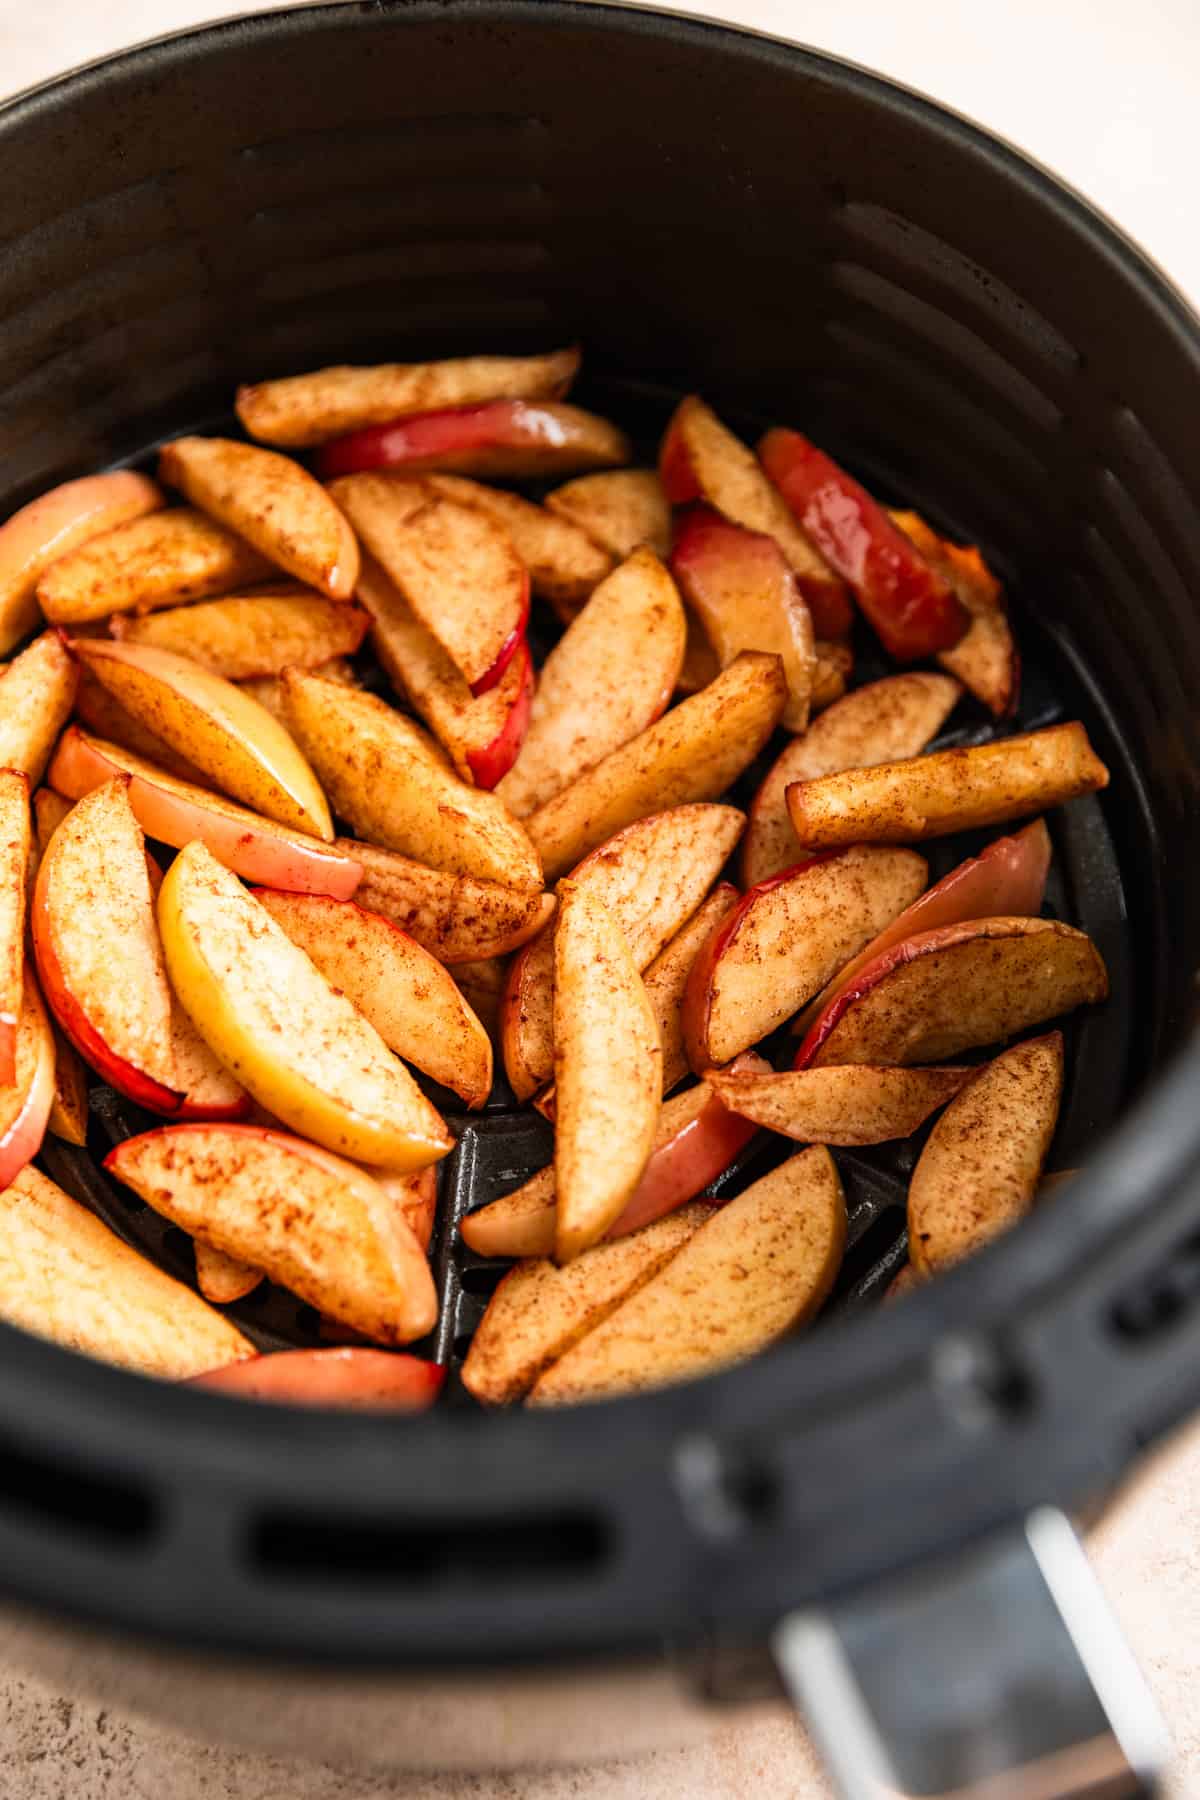 Cooked apple slices in air fryer basket.